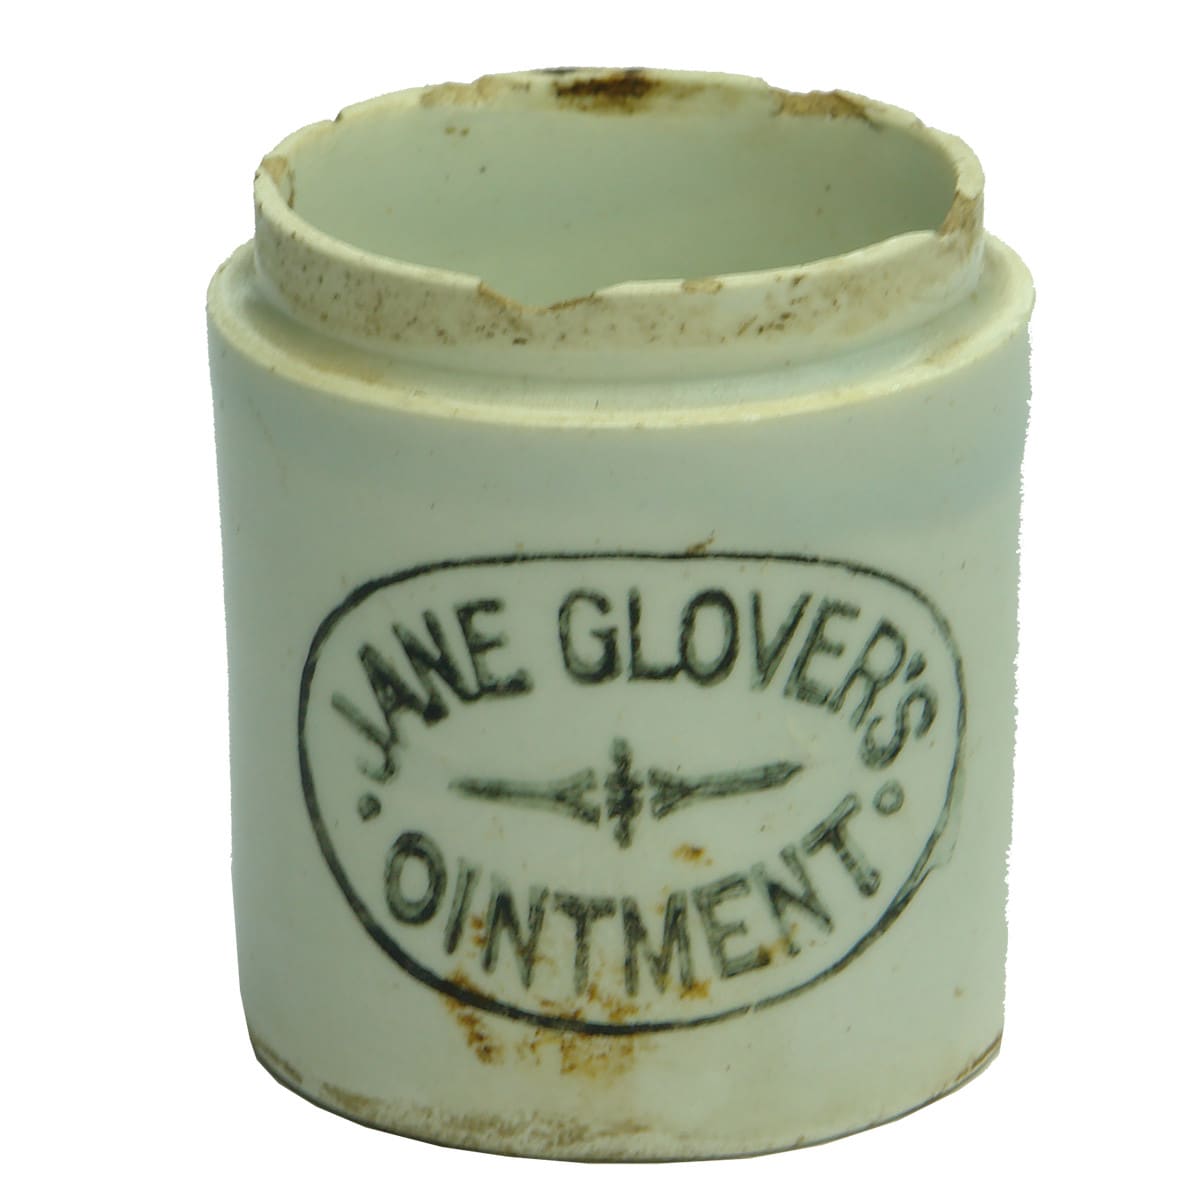 Ointment Pot. Jane Glover's Ointment. Black on White. (Sale, Victoria)